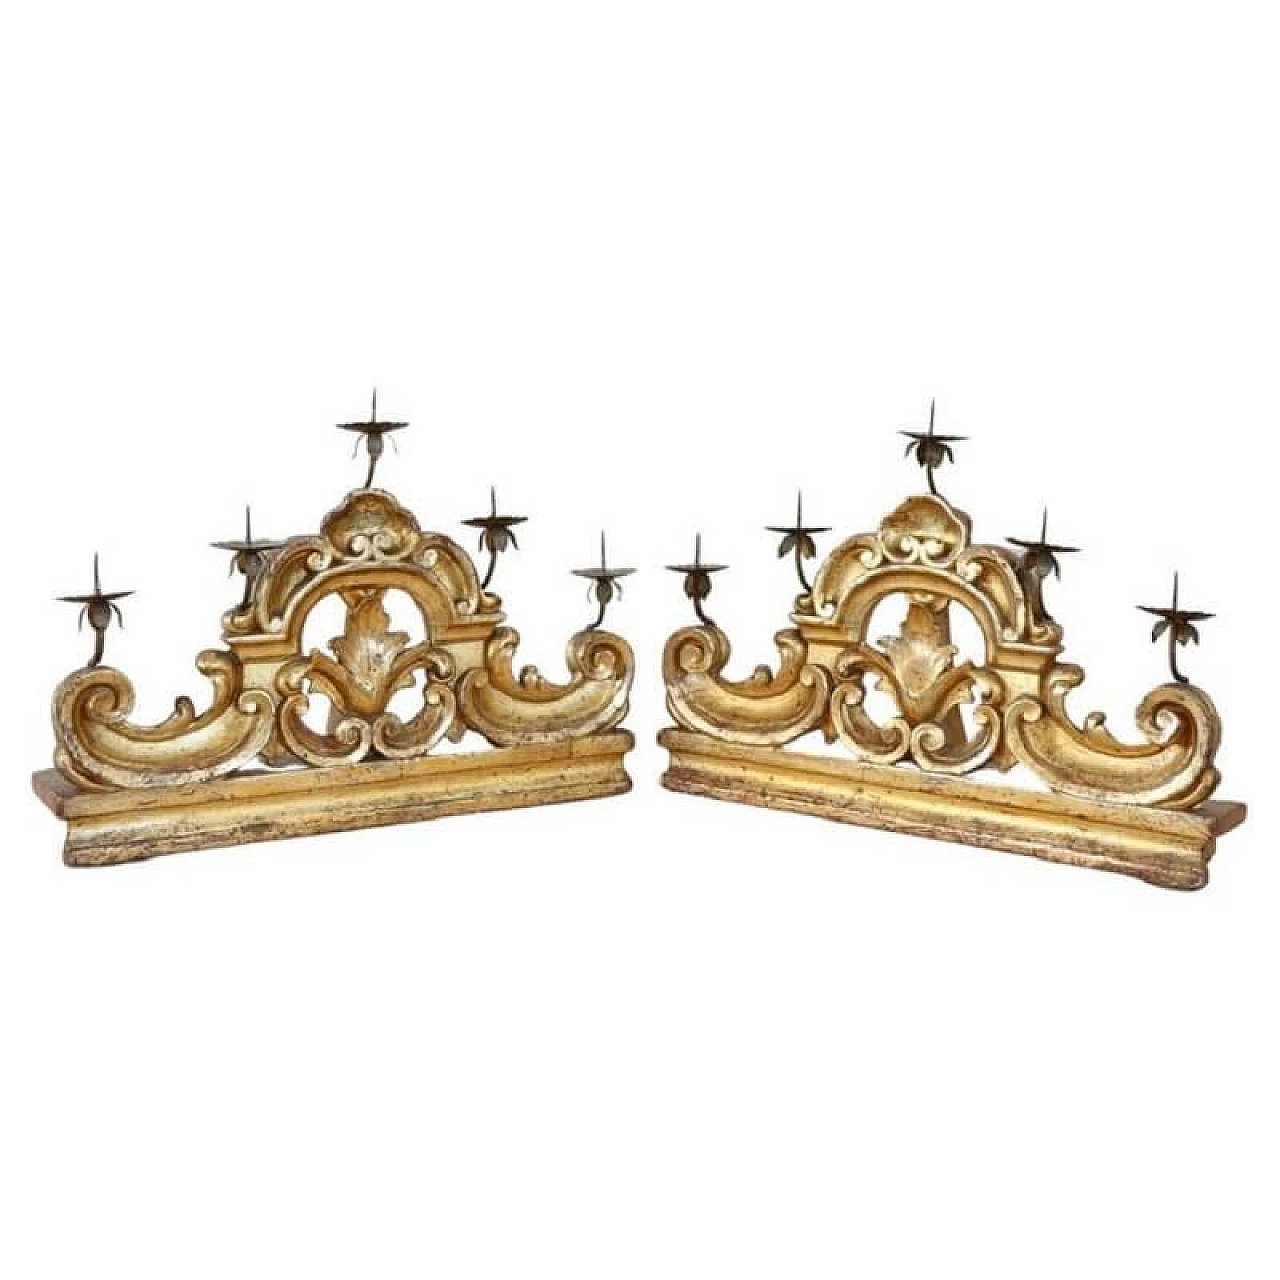 Pair of five-armed candelabra in carved and gilded wood, late 18th century 1